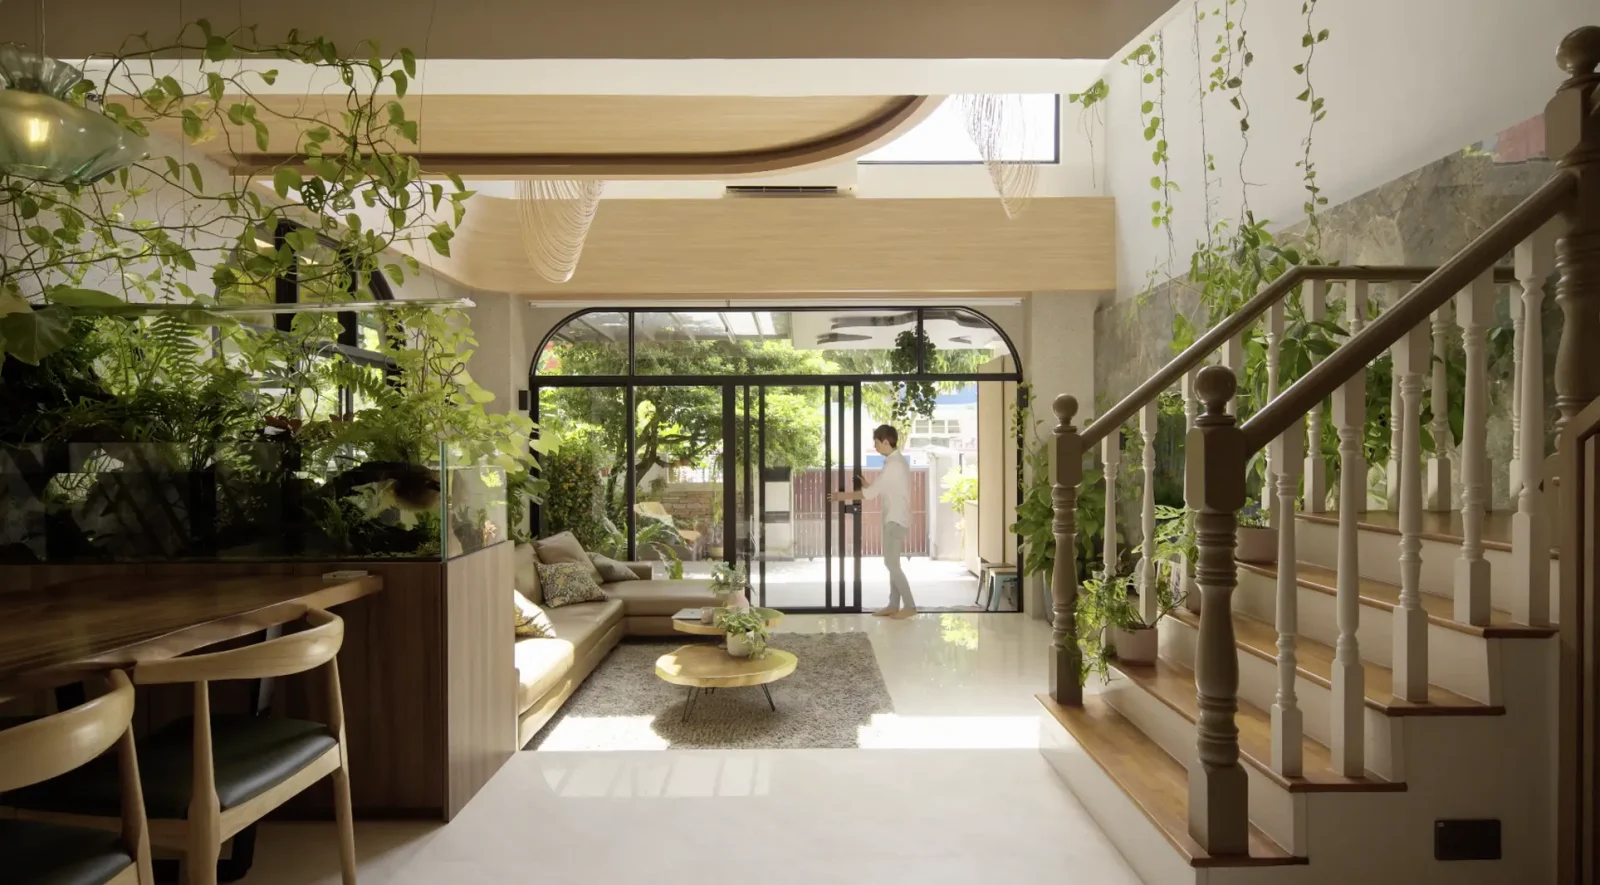 A Designers Journey To A Secret Garden Home For His Family 2